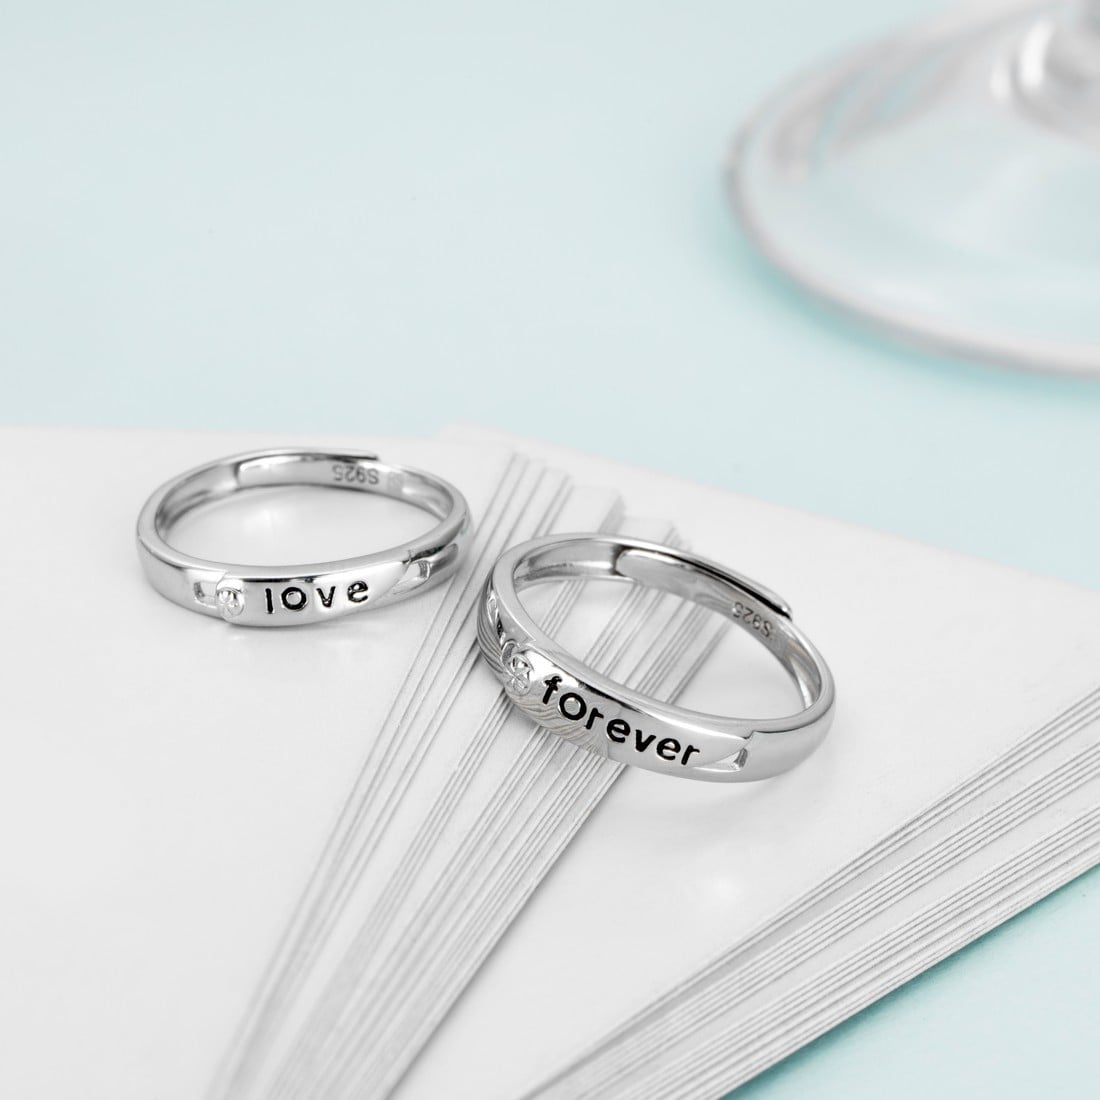 Love Forever 925 Sterling Silver Couple Ring (Adjustable)